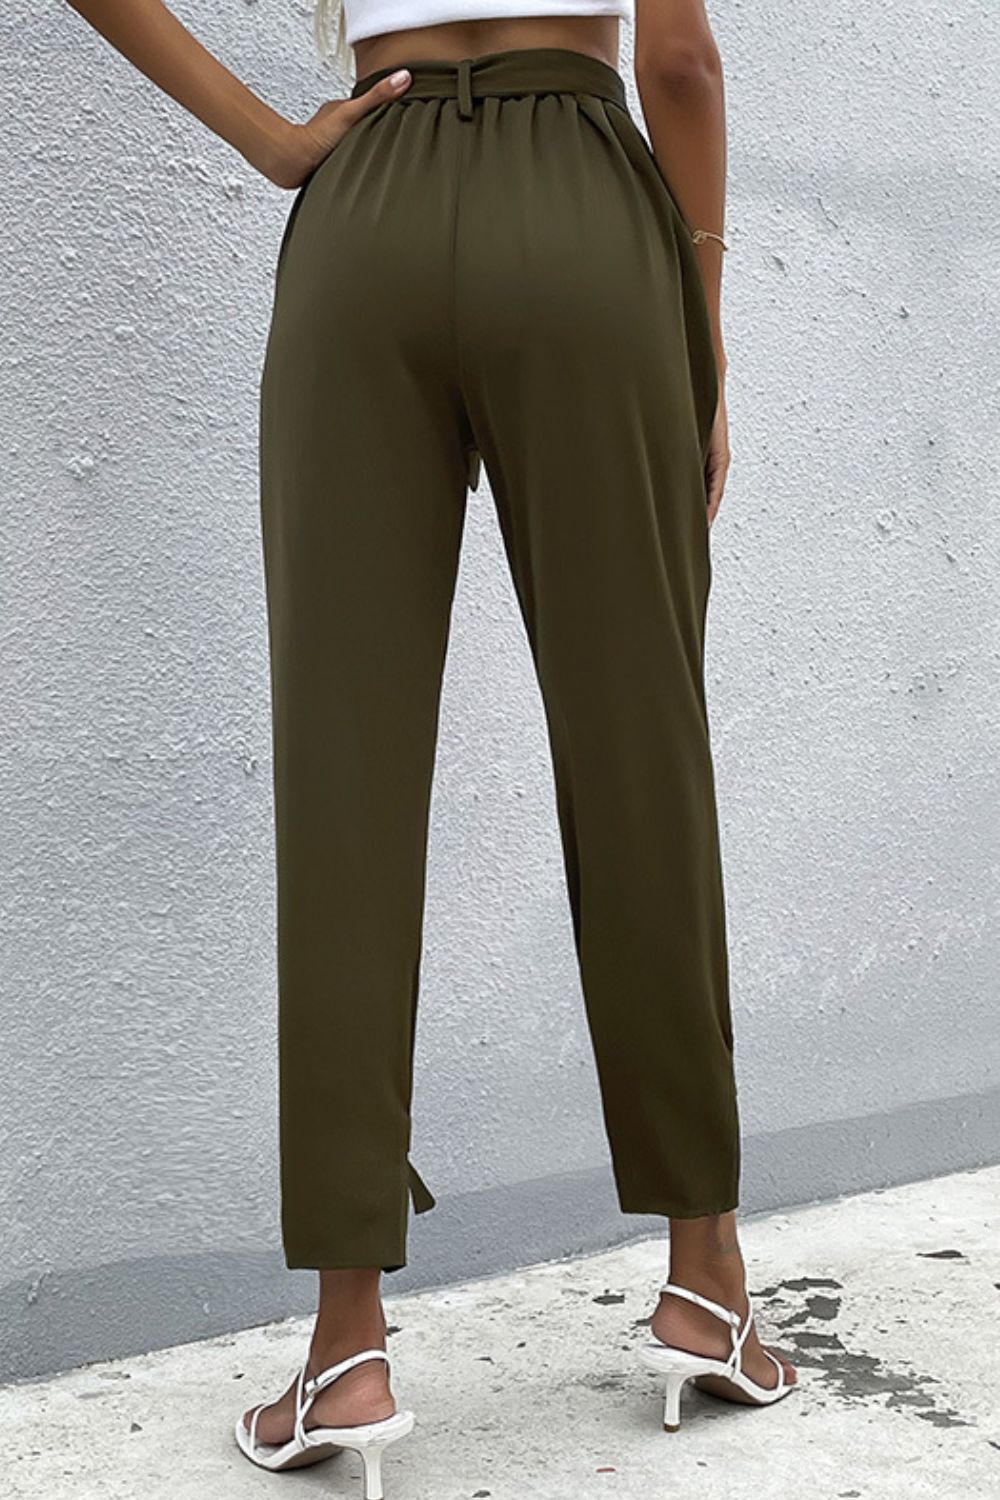 Tie Detail Belted Pants with Pockets - Bottoms - Pants - 2 - 2024